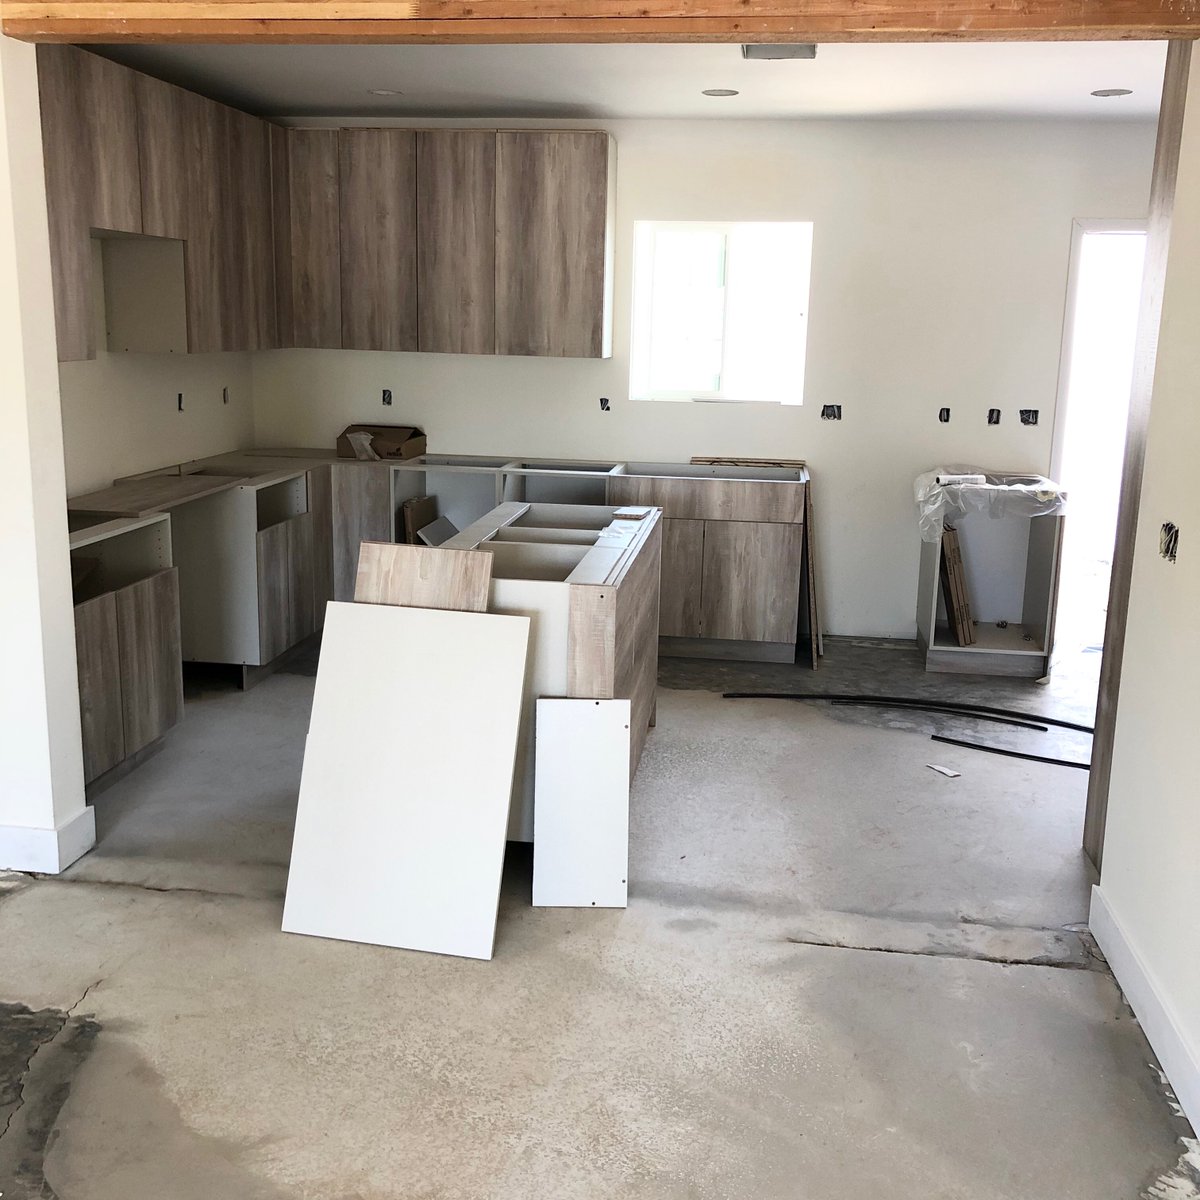 The cabinets are being installed! 🙌🙌🙌 
.
.
.
#topcomp #azrealestate #topdollar #sellformore #phoenixrealestate #scottsdalerealestate #renovations #updatetosell #renovatetosell